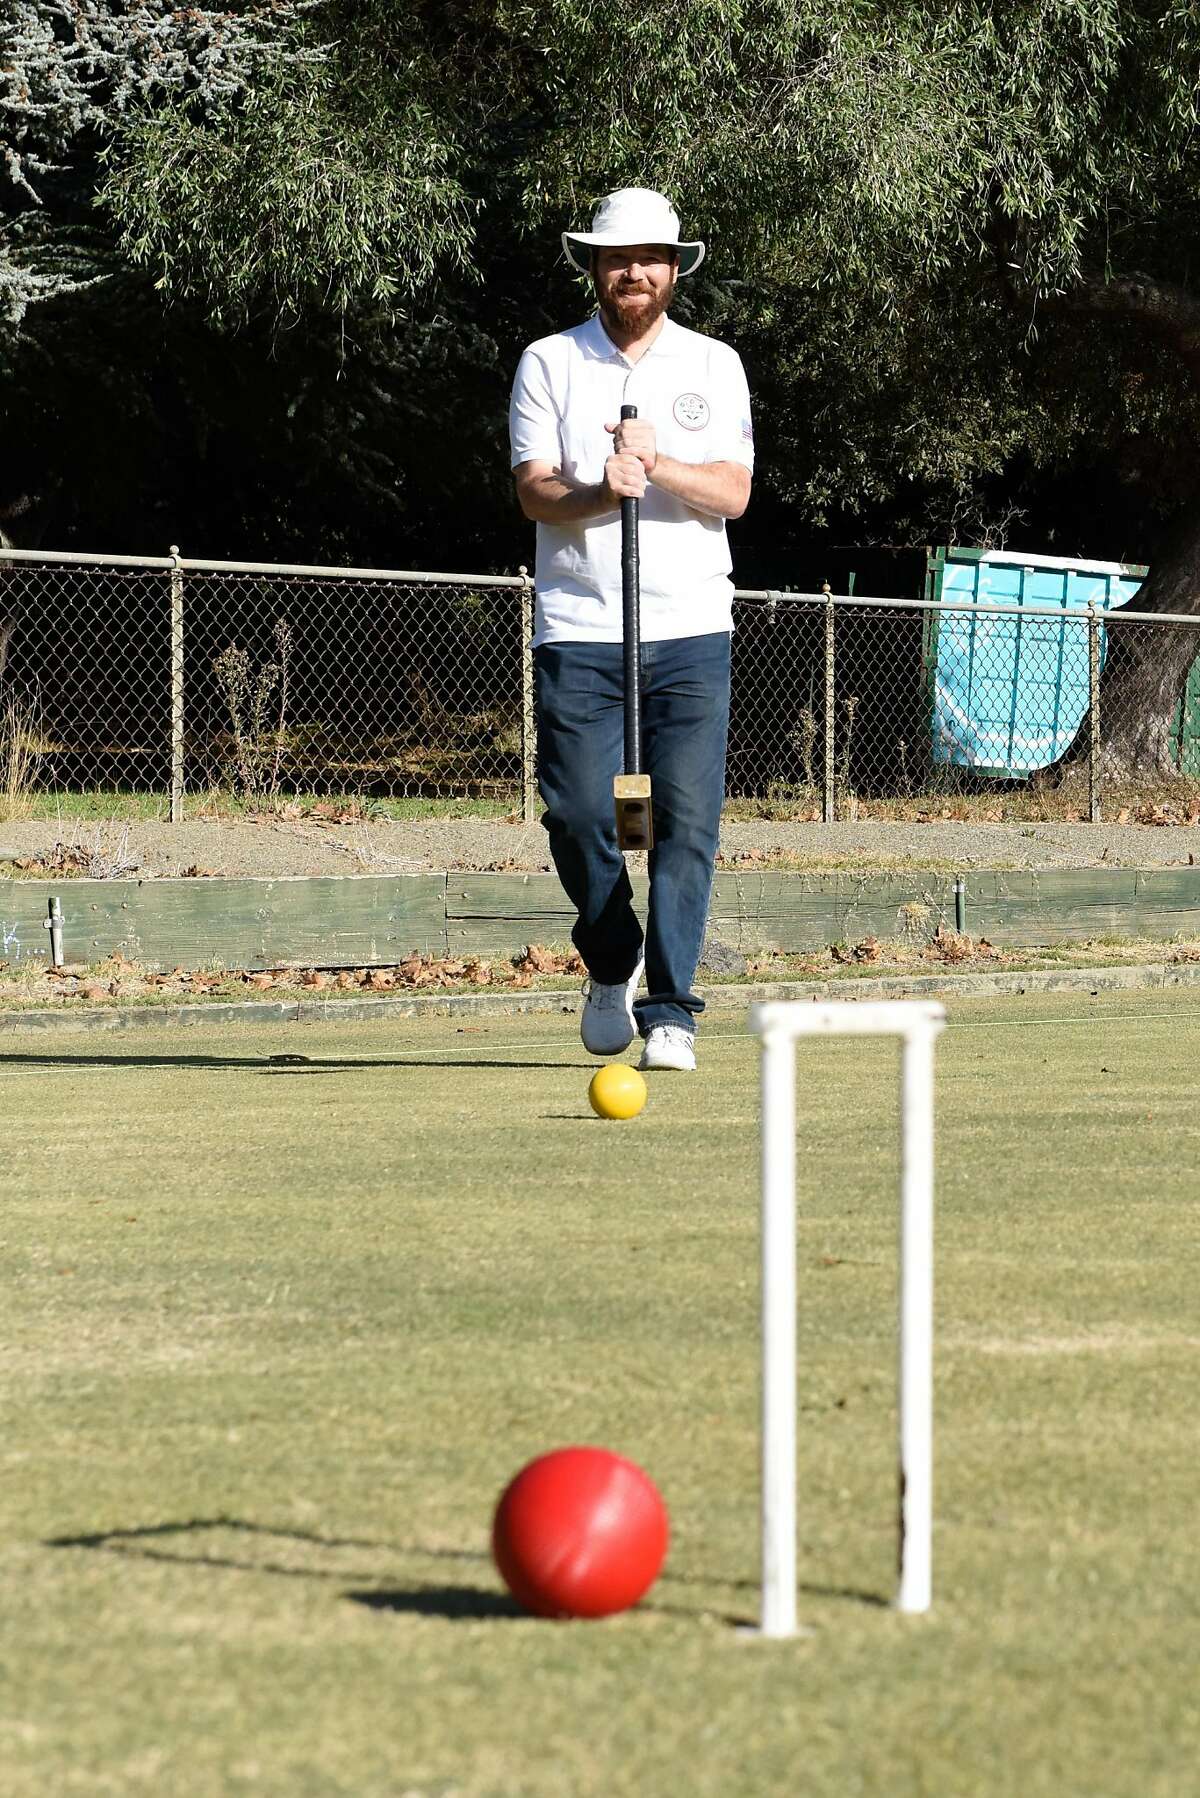 Ben Rothman, world champion of golf croquet, practices at the Oakland Croquet Club on October 17, 2019 in Oakland, Calif.